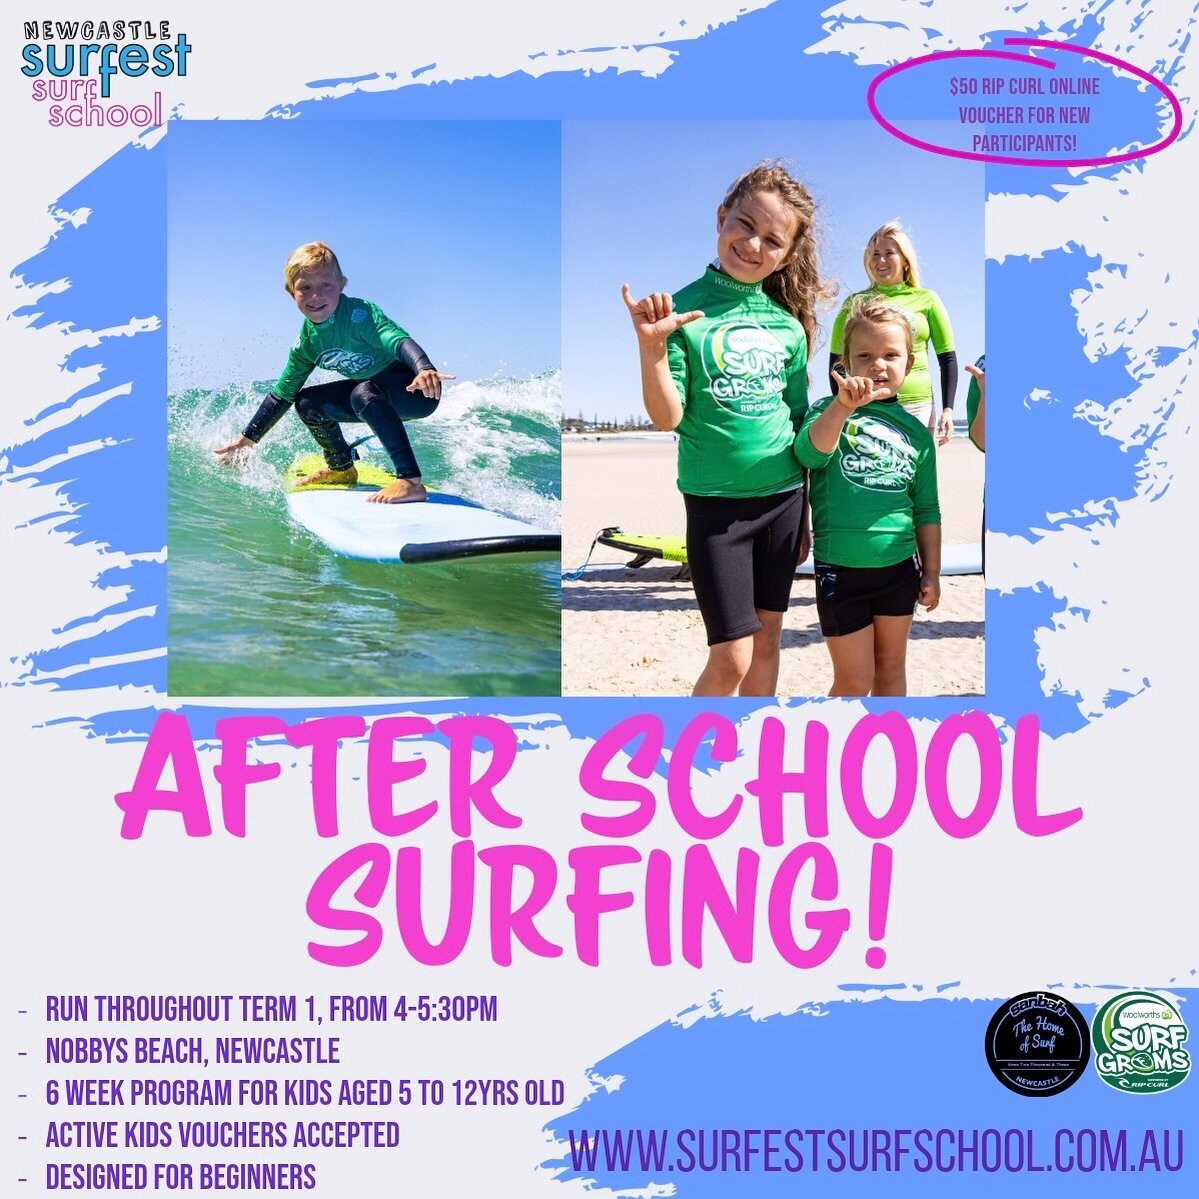 TERM 1 AFTER SCHOOL SURFING!

Our after school @surfgroms_ lessons are fast approaching!

Make sure you book now to secure your spot.

- Run from 4-5:30pm at Nobby&rsquo;s Beach
- For children aged 5-12yrs old
- All equipment is provided 
- Active ki